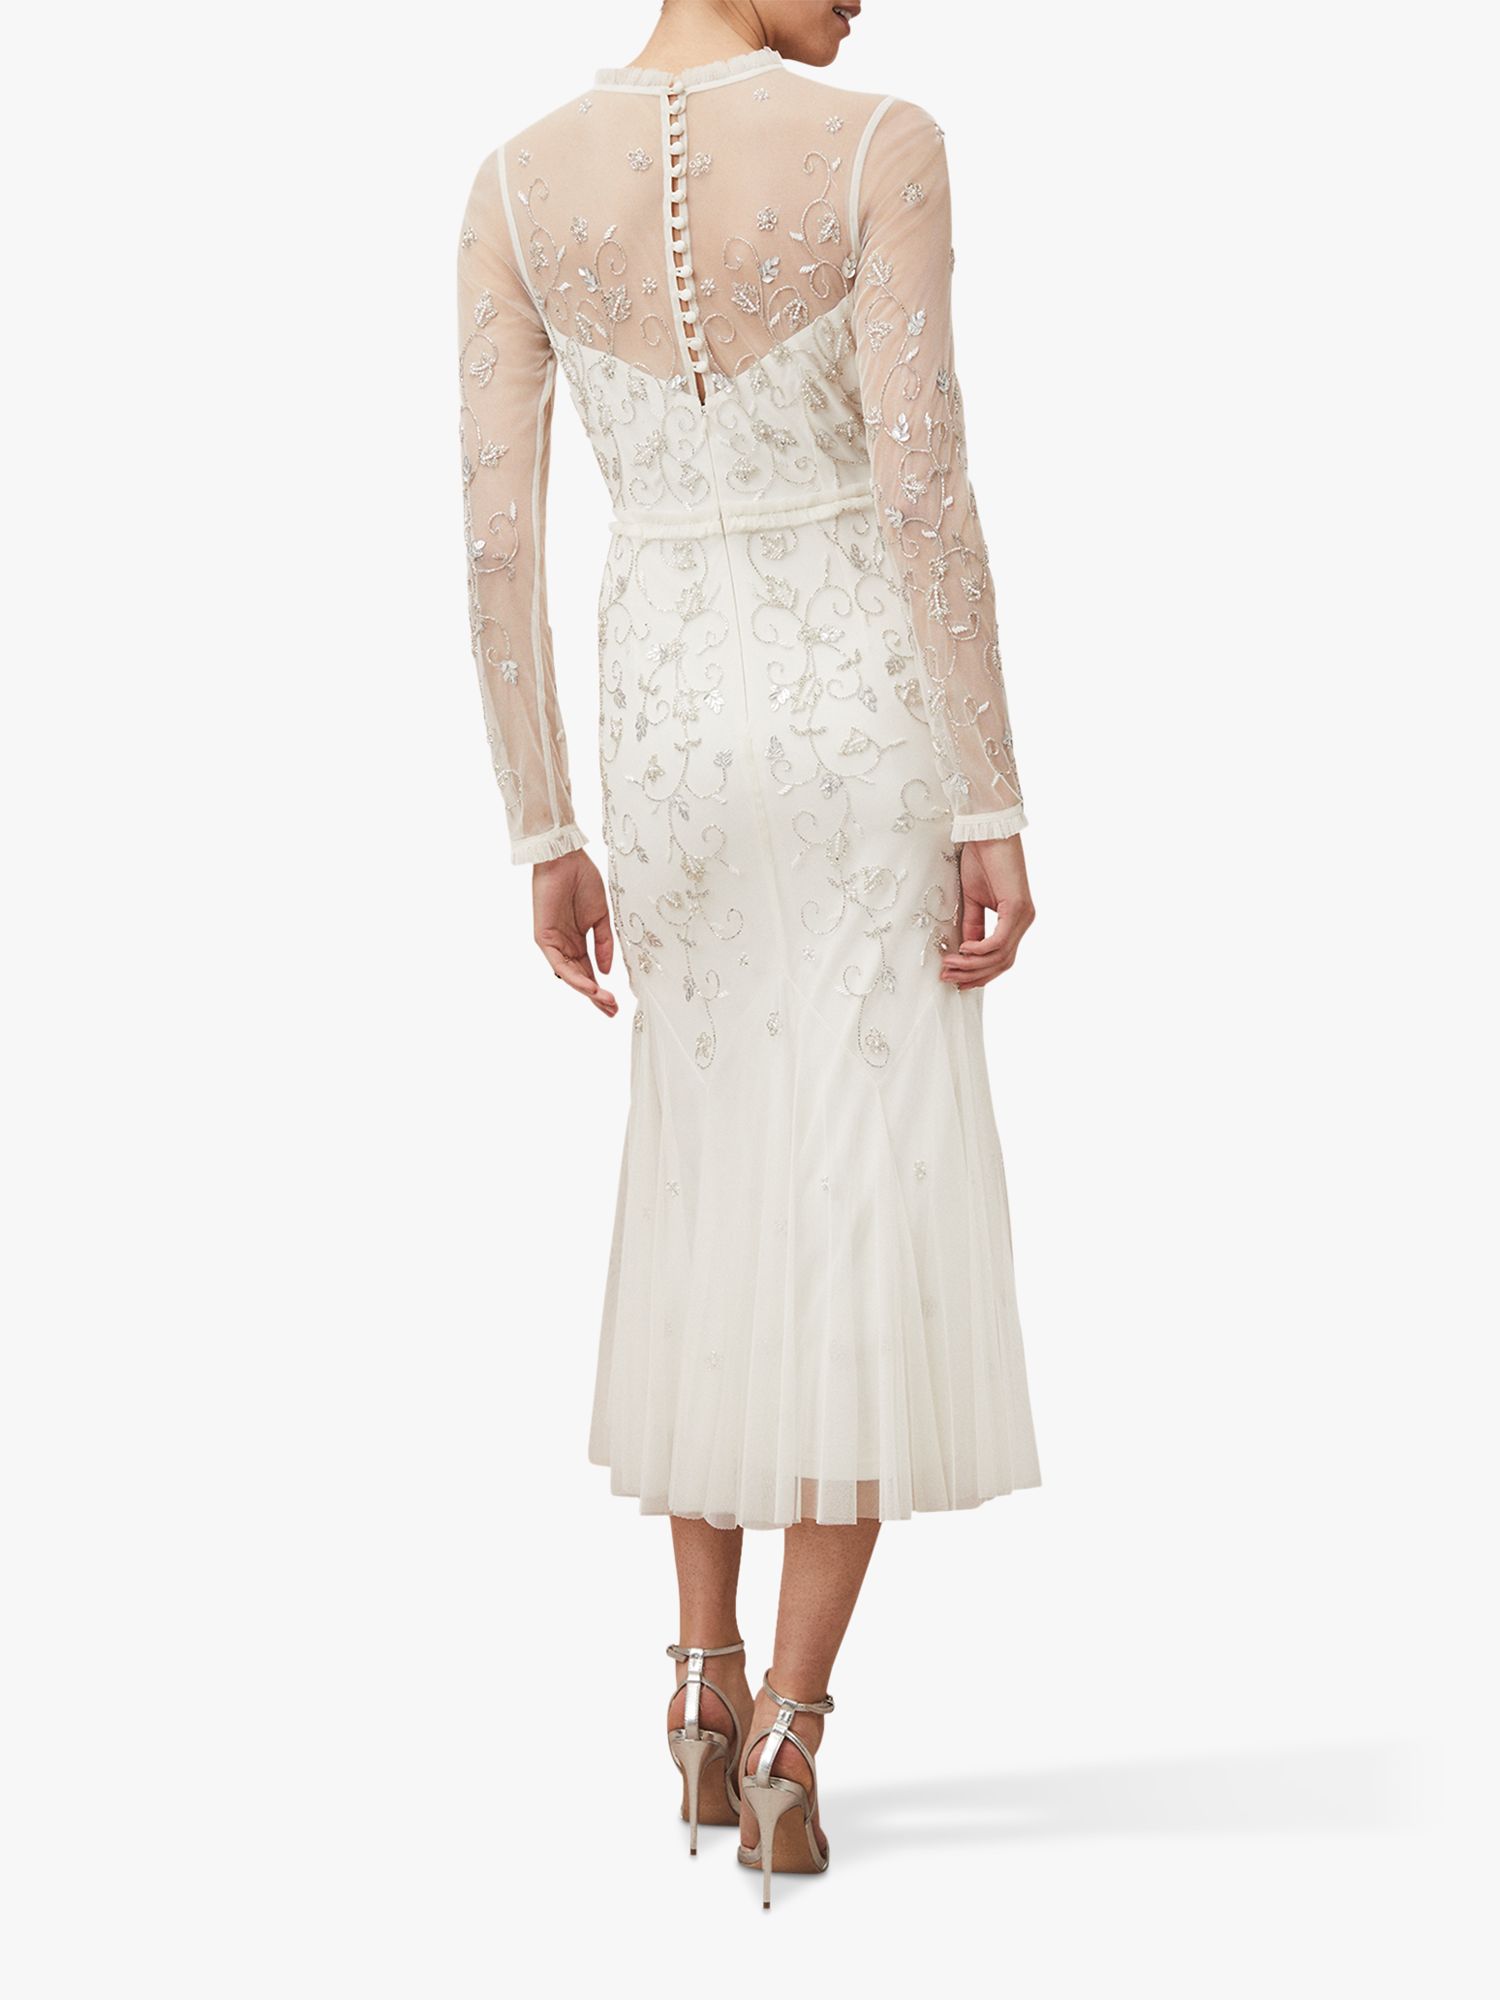 Phase Eight Annie Bridal Floral Embellished Midi Dress, Ivory at John Lewis & Partners